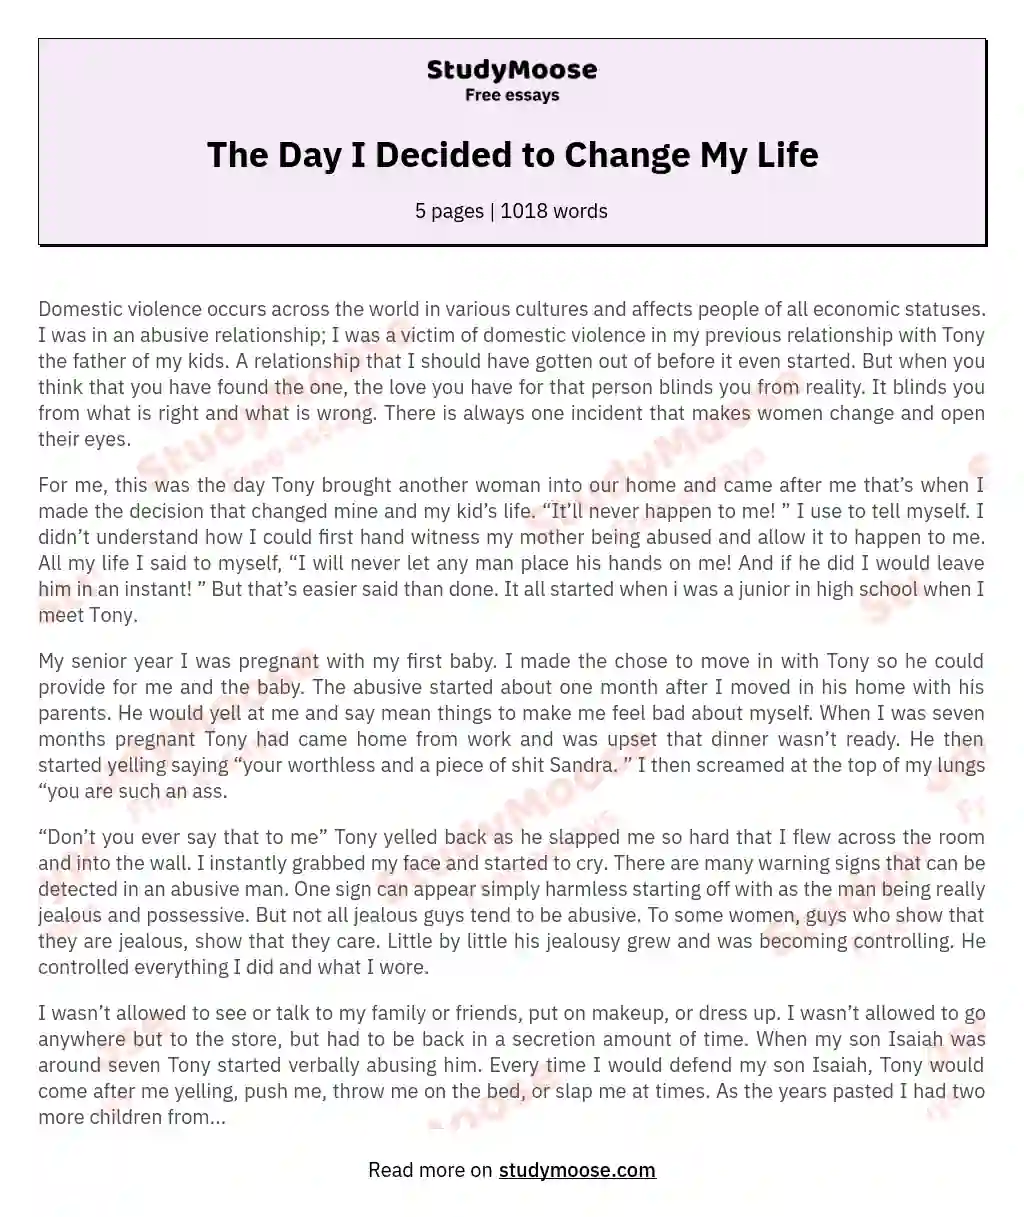 The Day I Decided to Change My Life essay